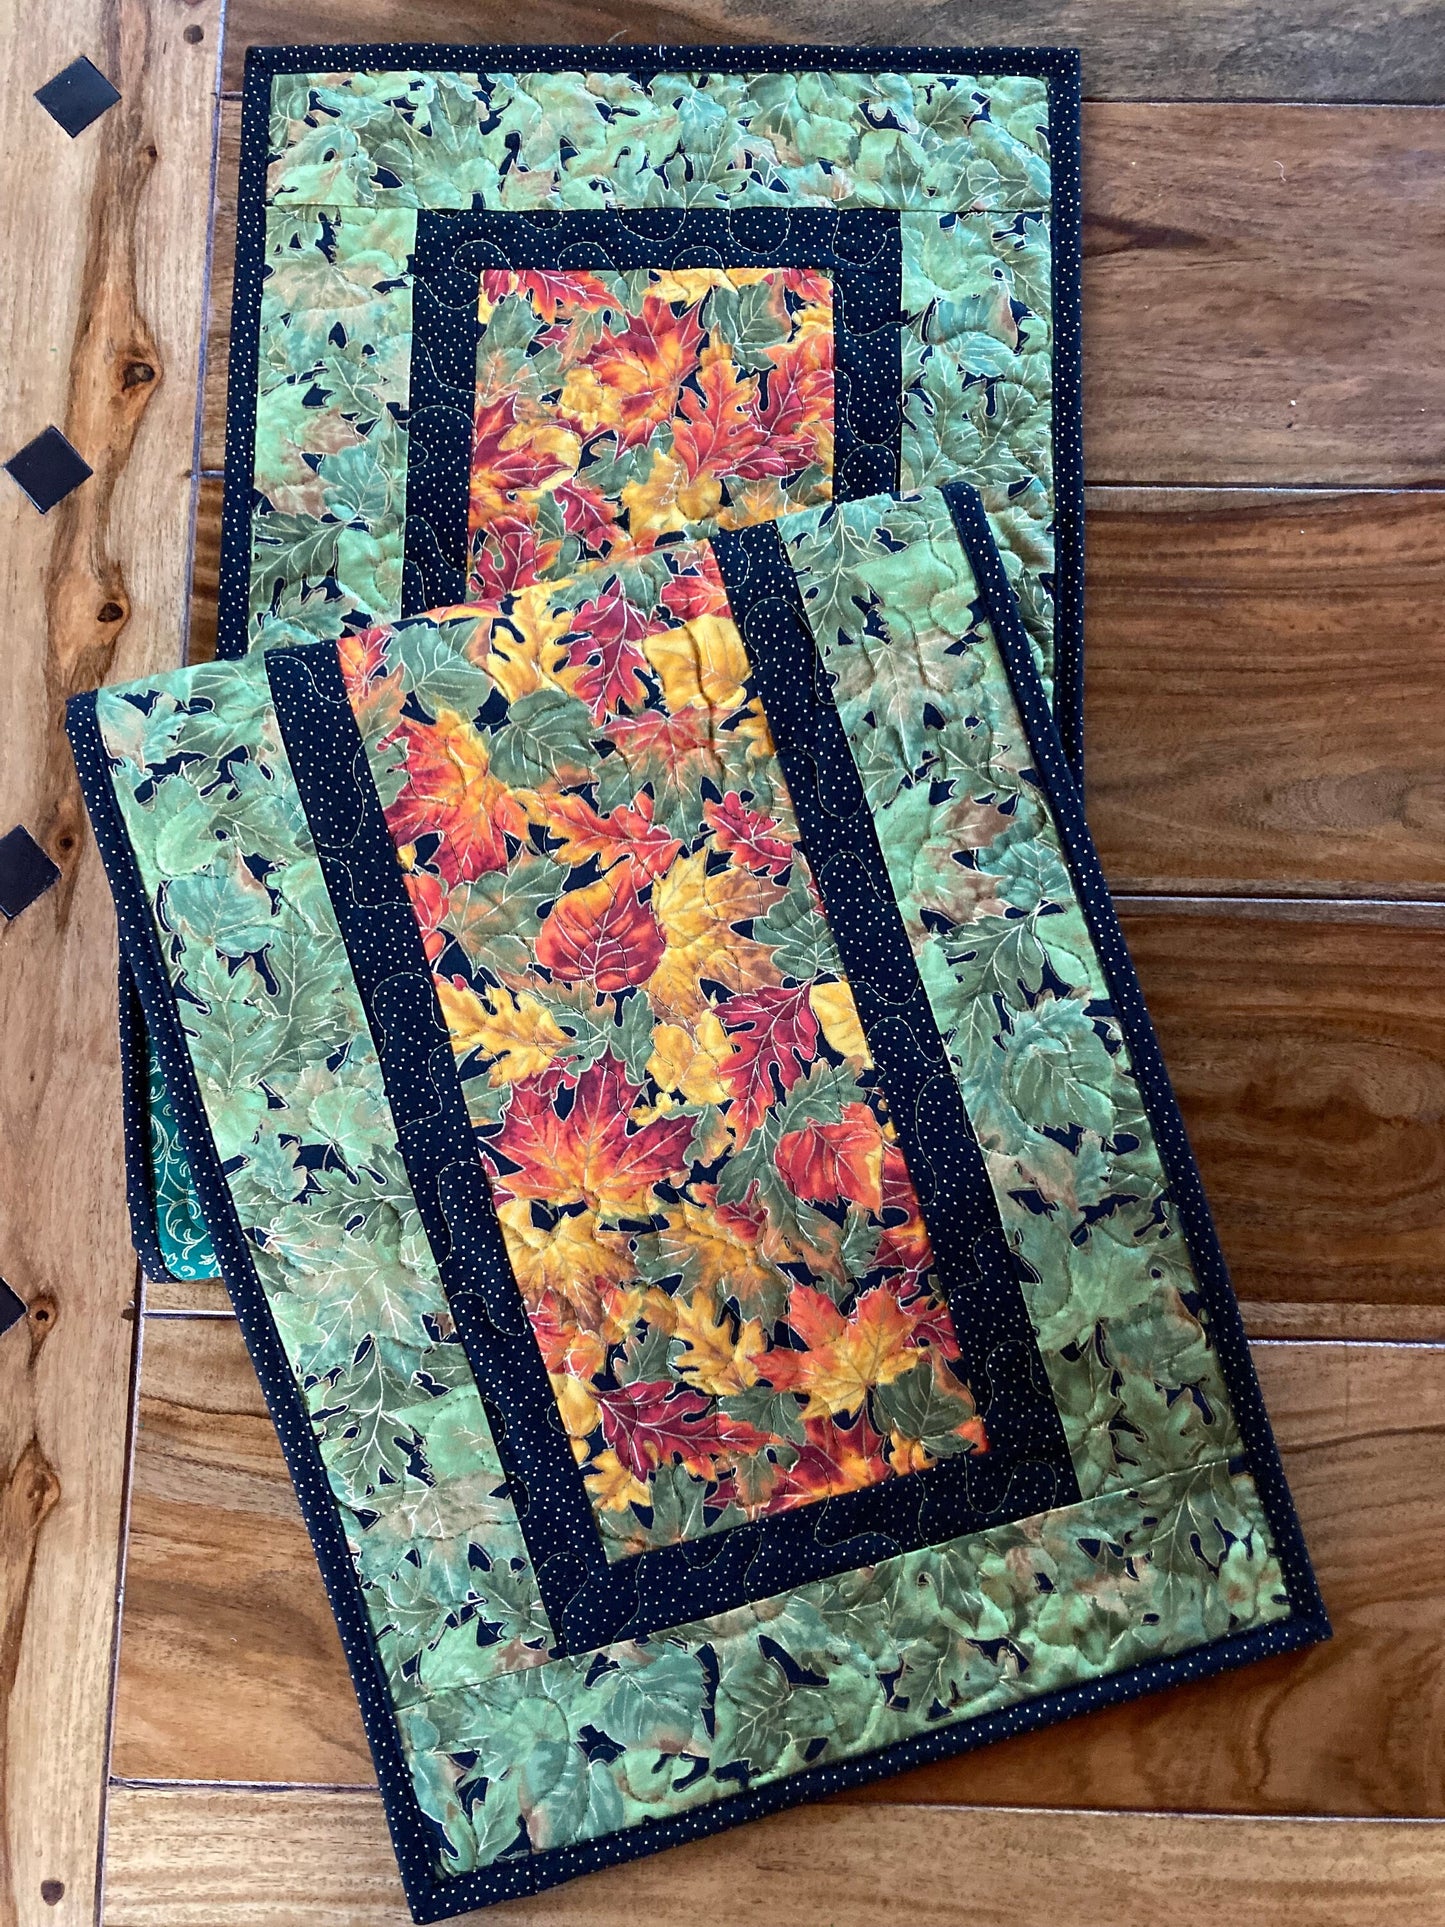 Fall Table Runner Quilted Vibrant Autumn Leaves, Dining Coffee Table Runner, 13x48" Reversible Holiday Winter, Red Orange Green End Table